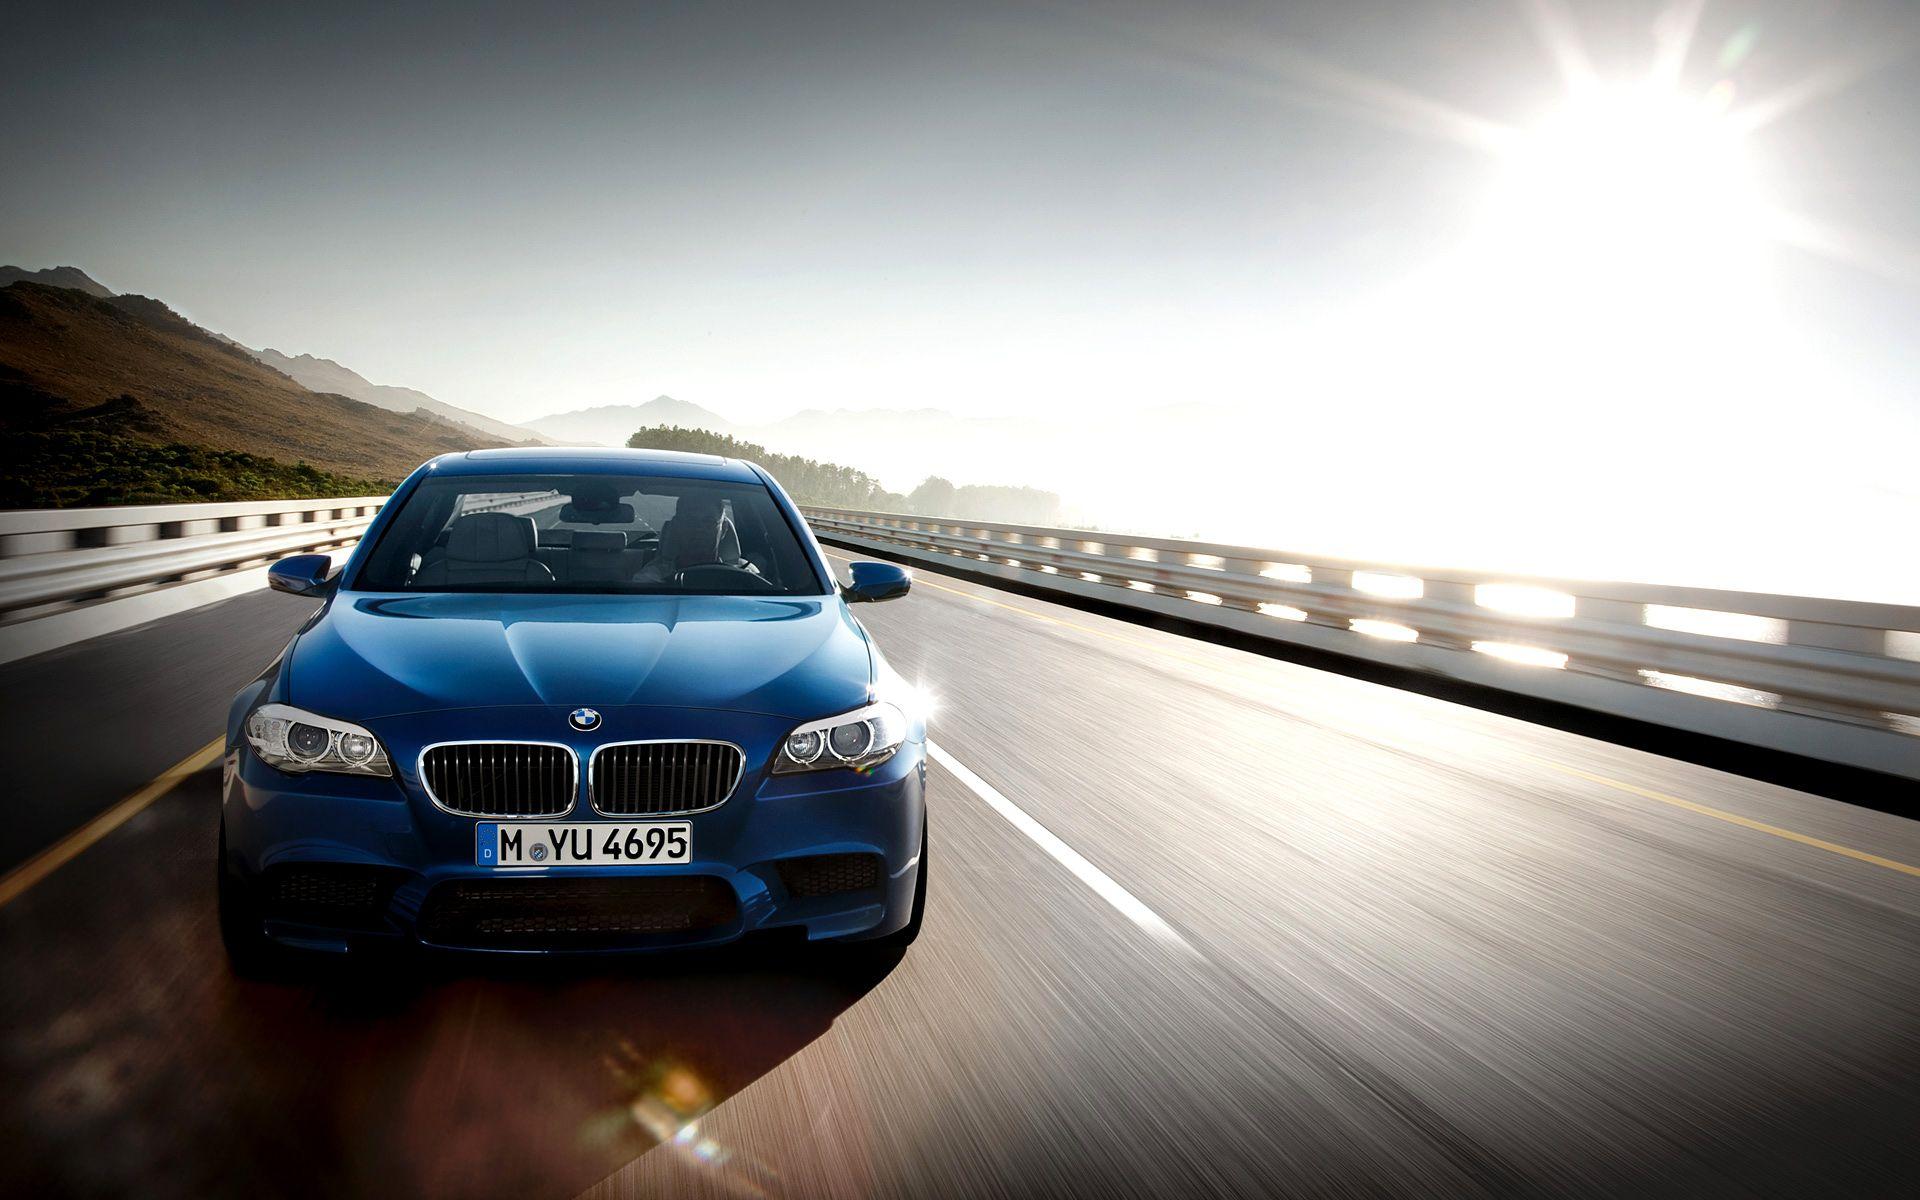 Your Batch of BMW M LCI Wallpapers Is Here